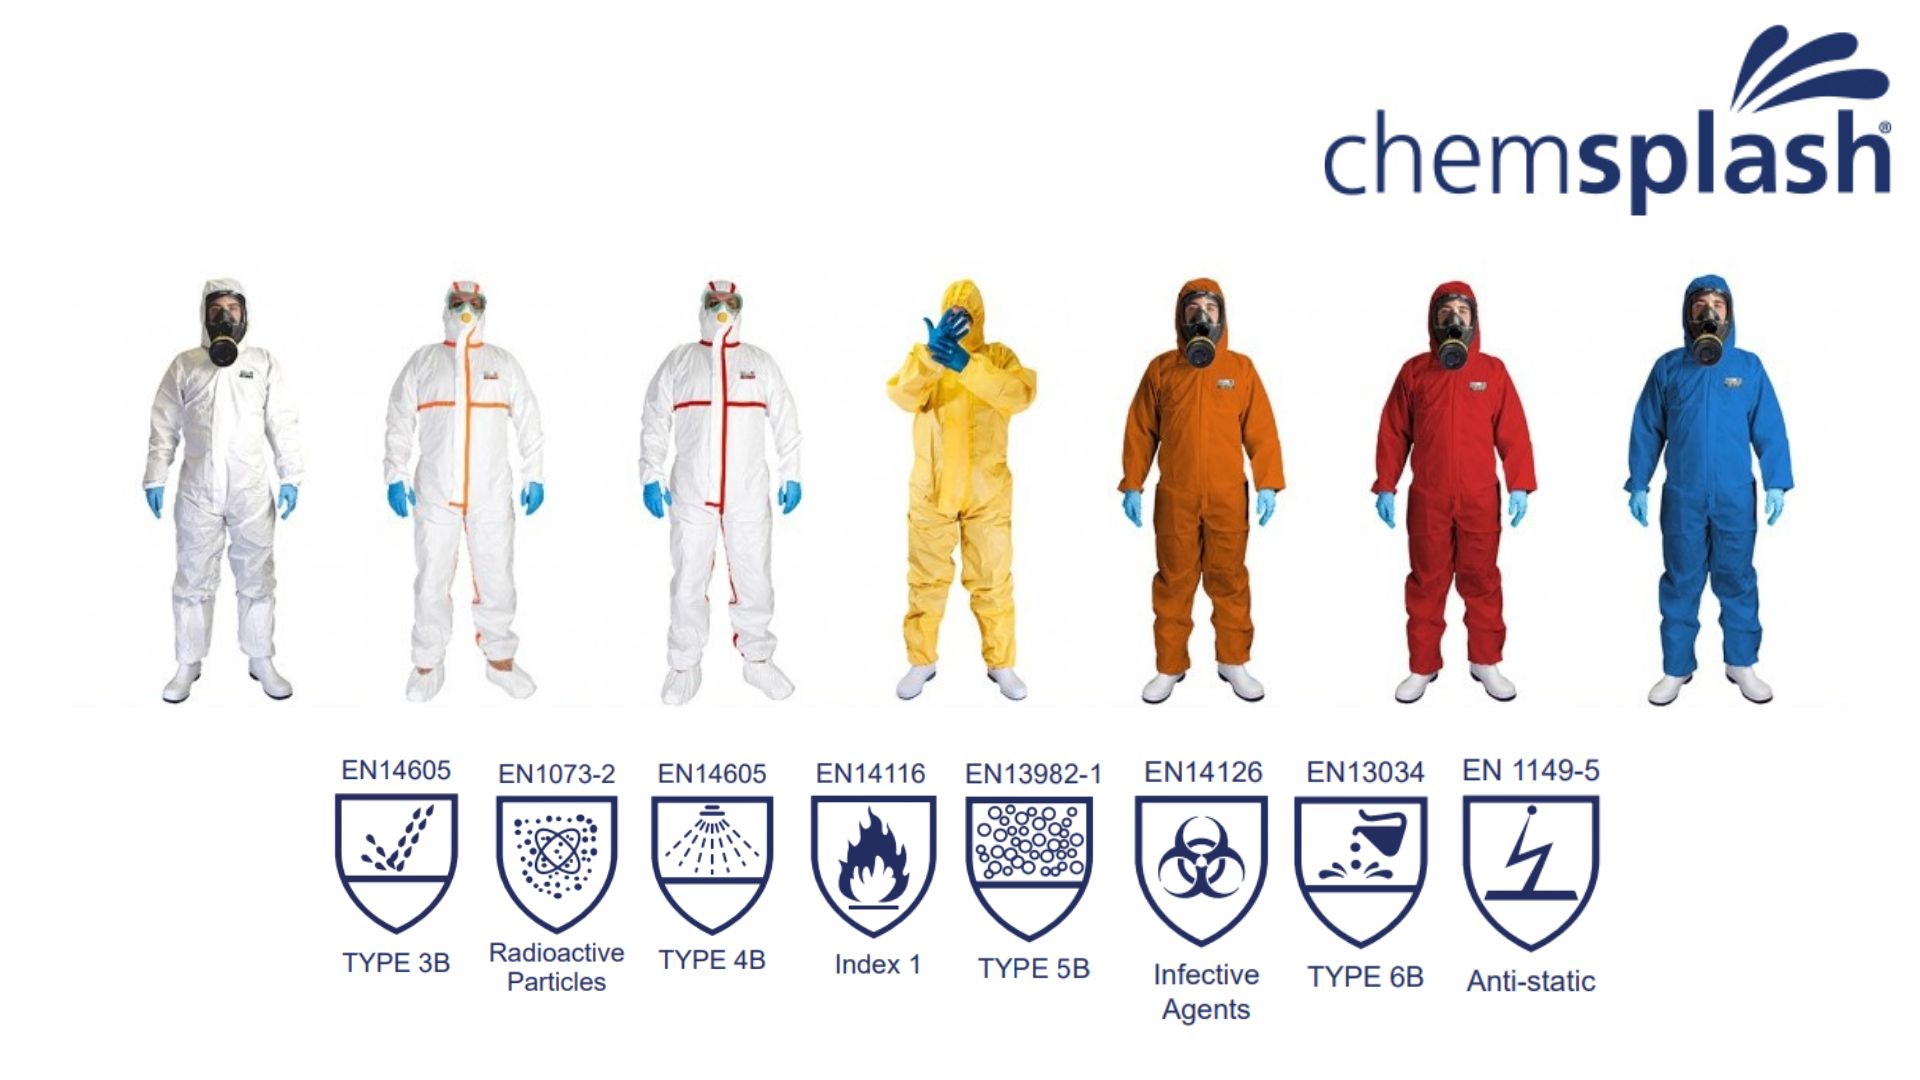 Chemsplash Coveralls in a row